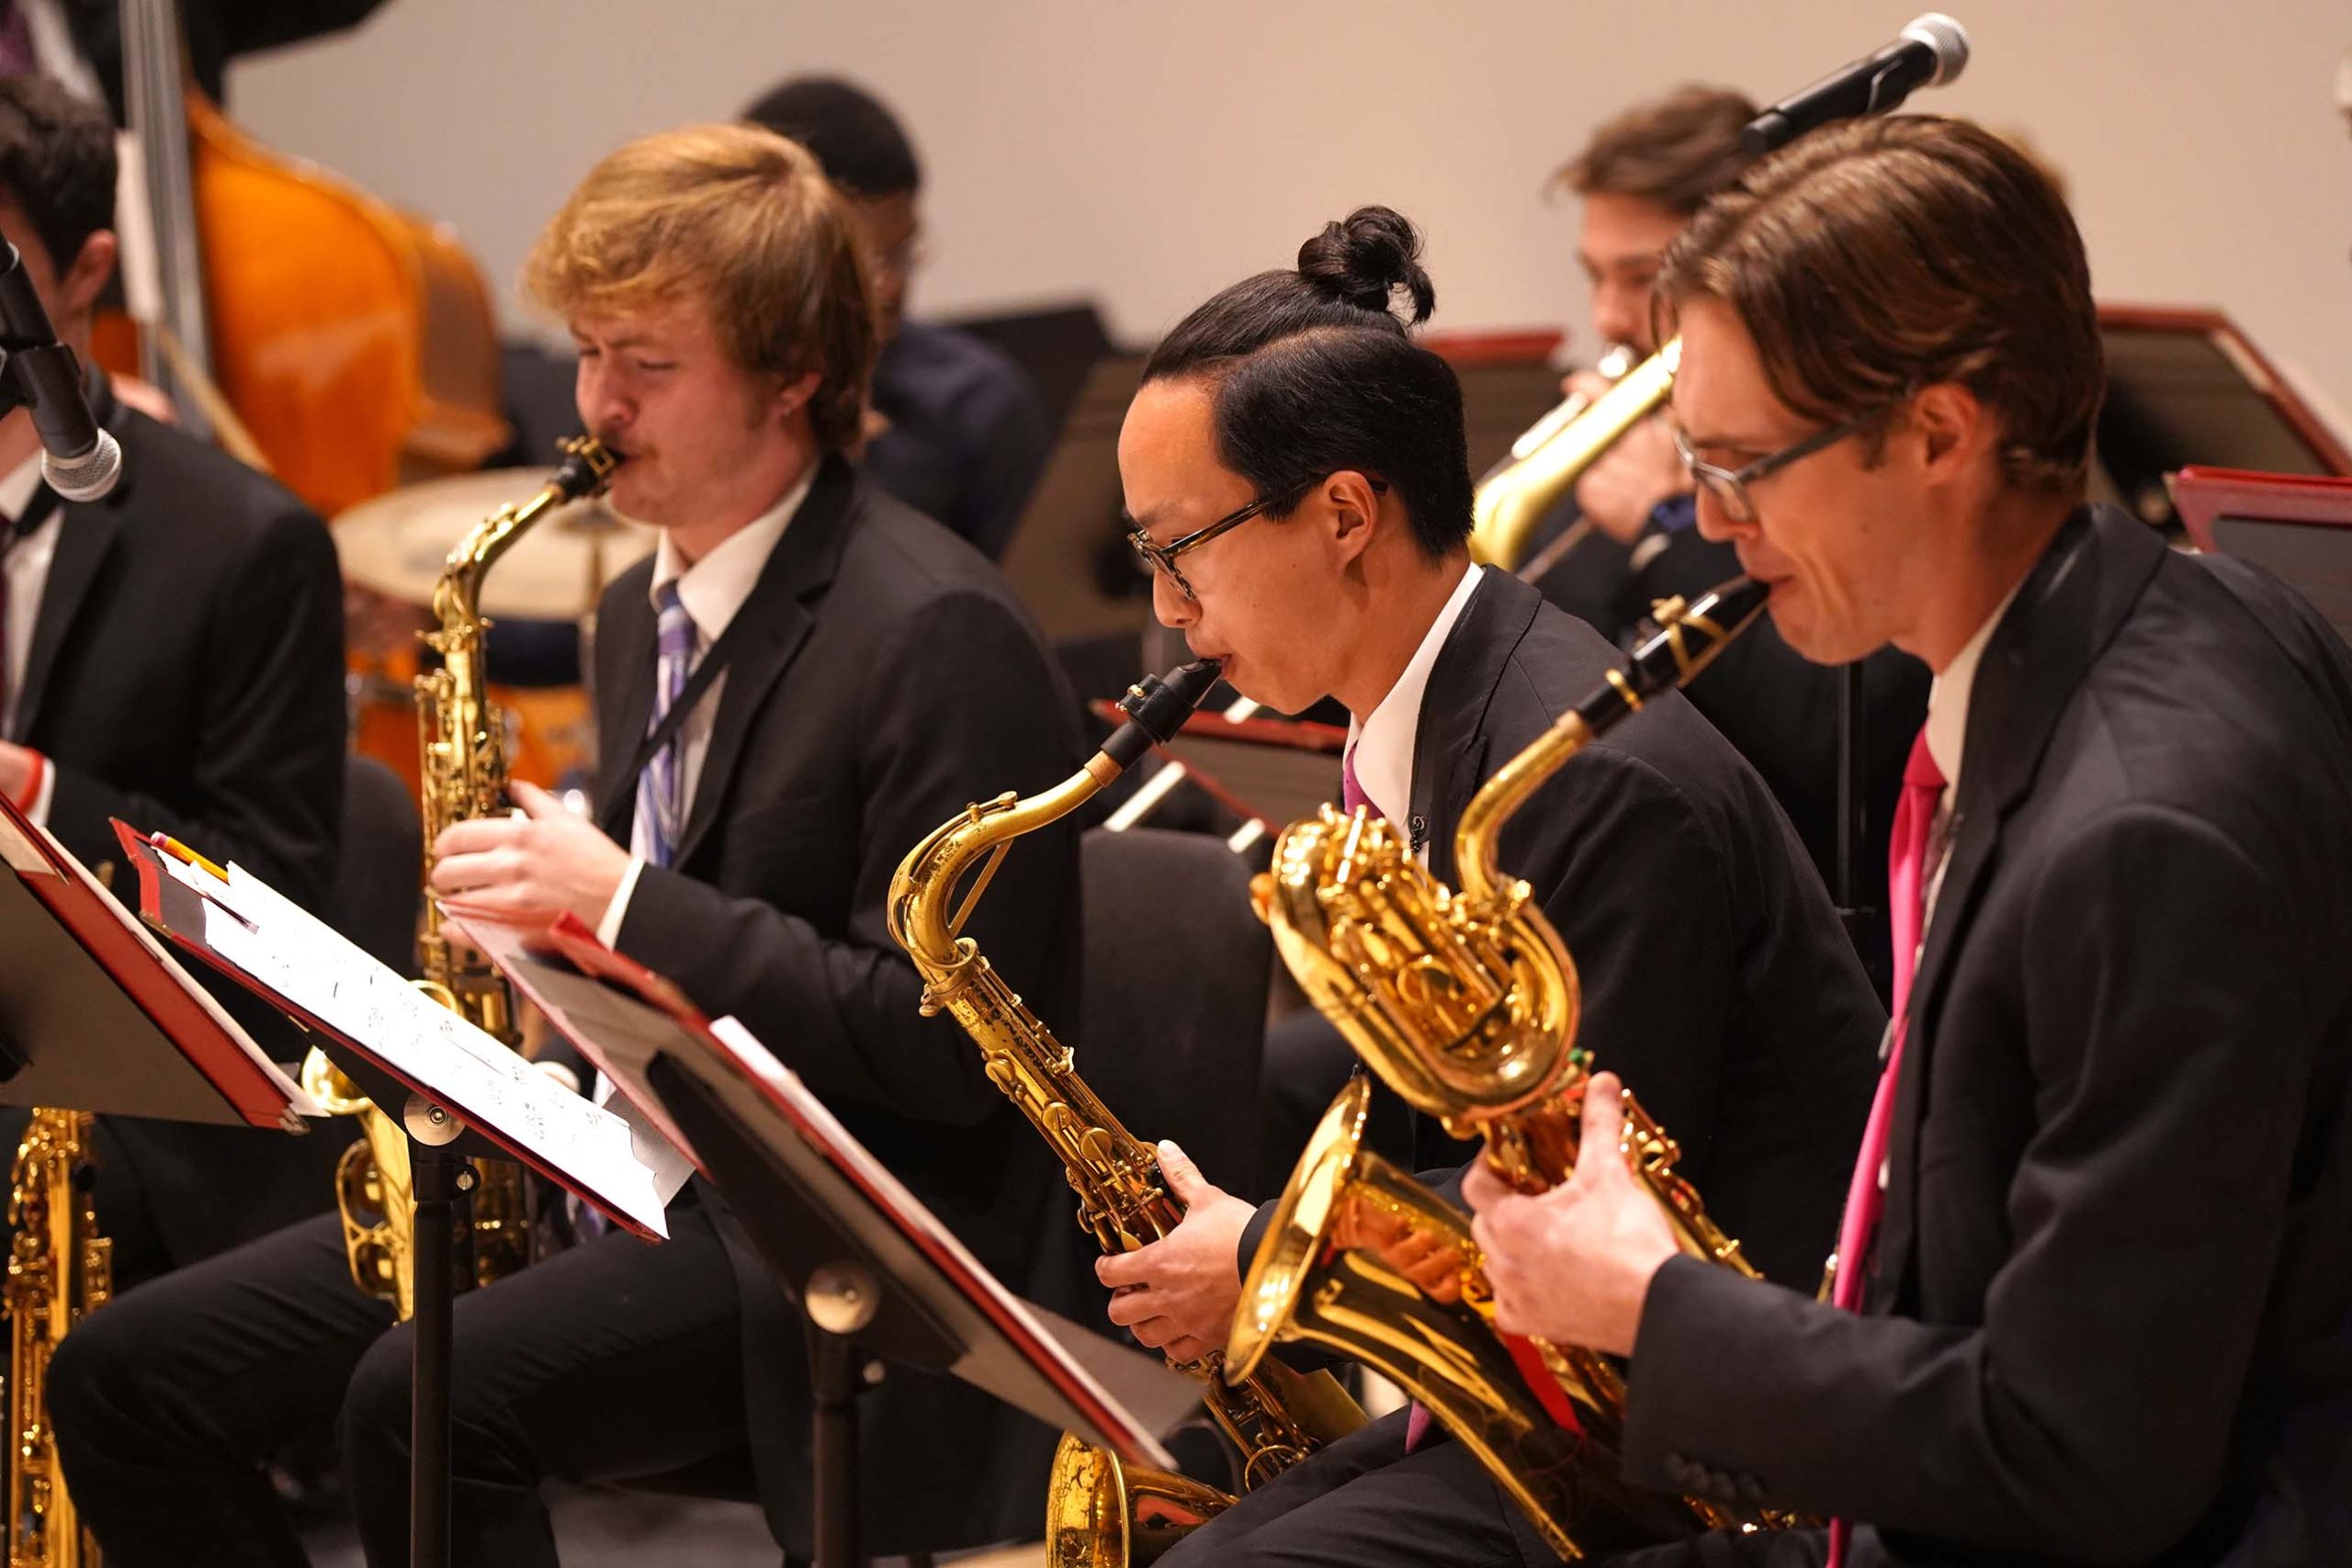 A close-up of three players in the saxophone section during a performance of the Jazz Ensemble